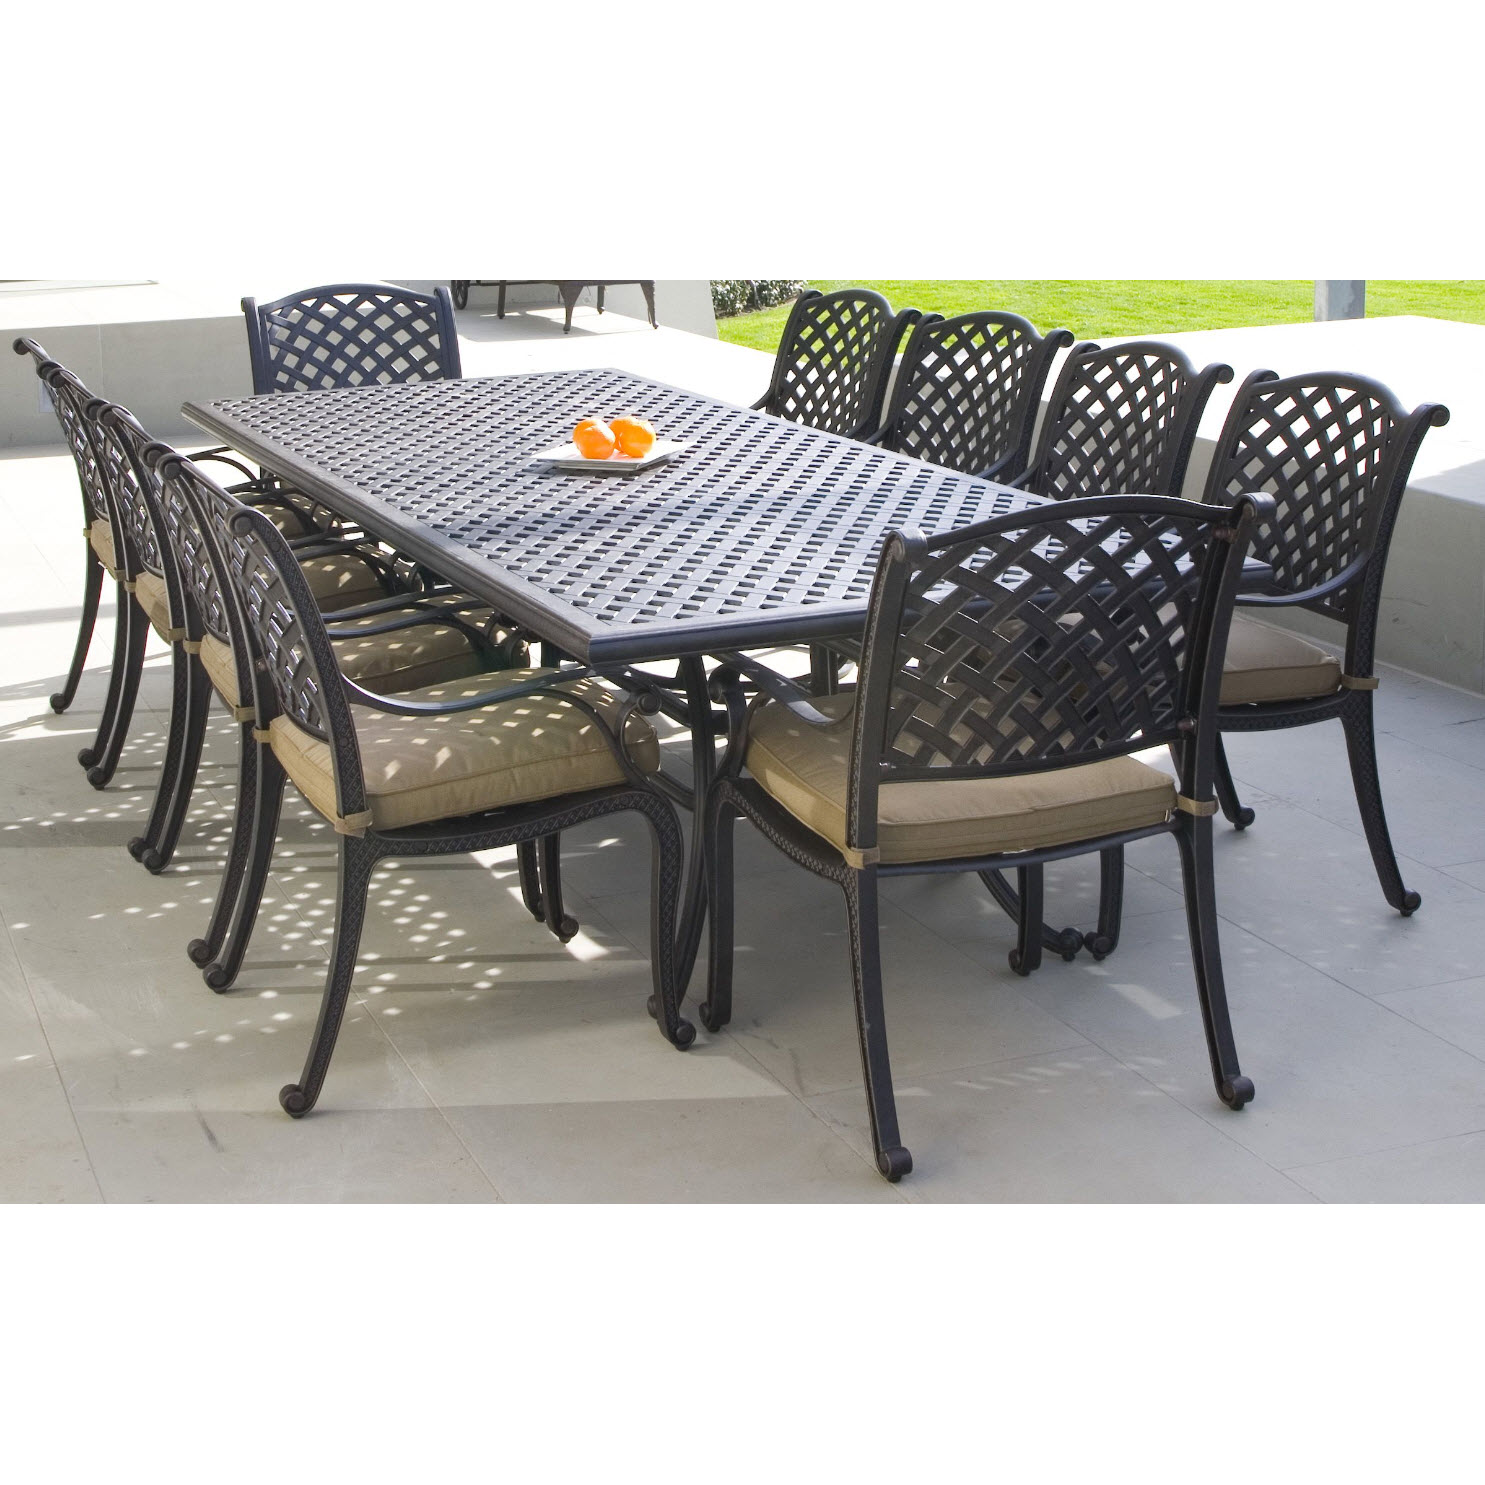 Melton Craft Nassau 11 Piece Dining, Metal Outdoor Table And Chairs Australia